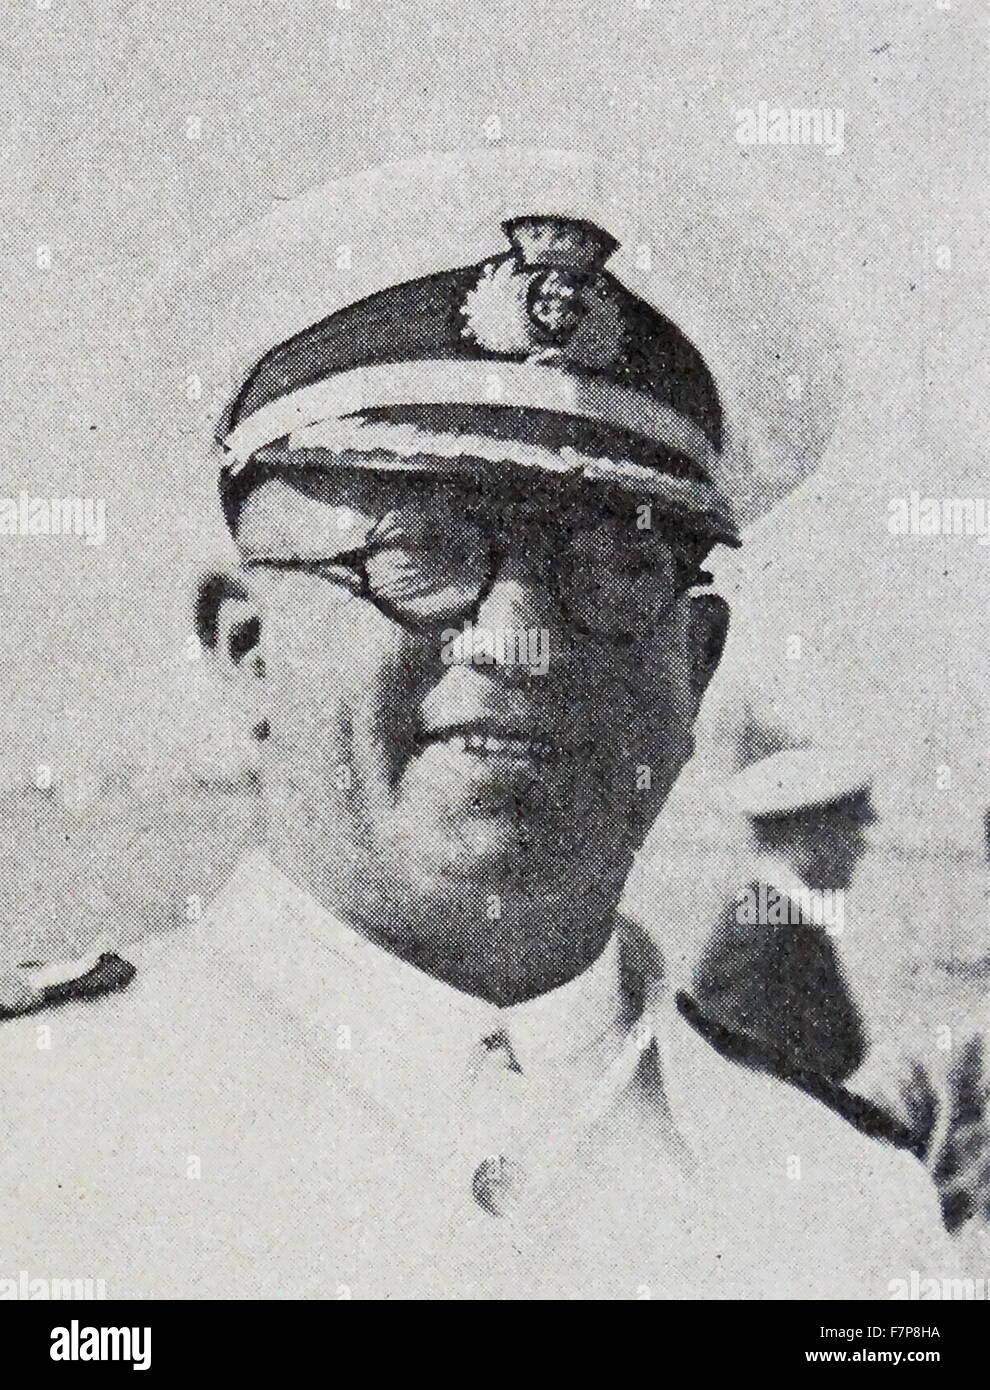 Nationalist Naval commander, Manuel Vierna Belando (1884 - March 6, 1938) Spanish captain of the Balearics, which was sunk during the Battle of Cape Palos in March 1938. Stock Photo